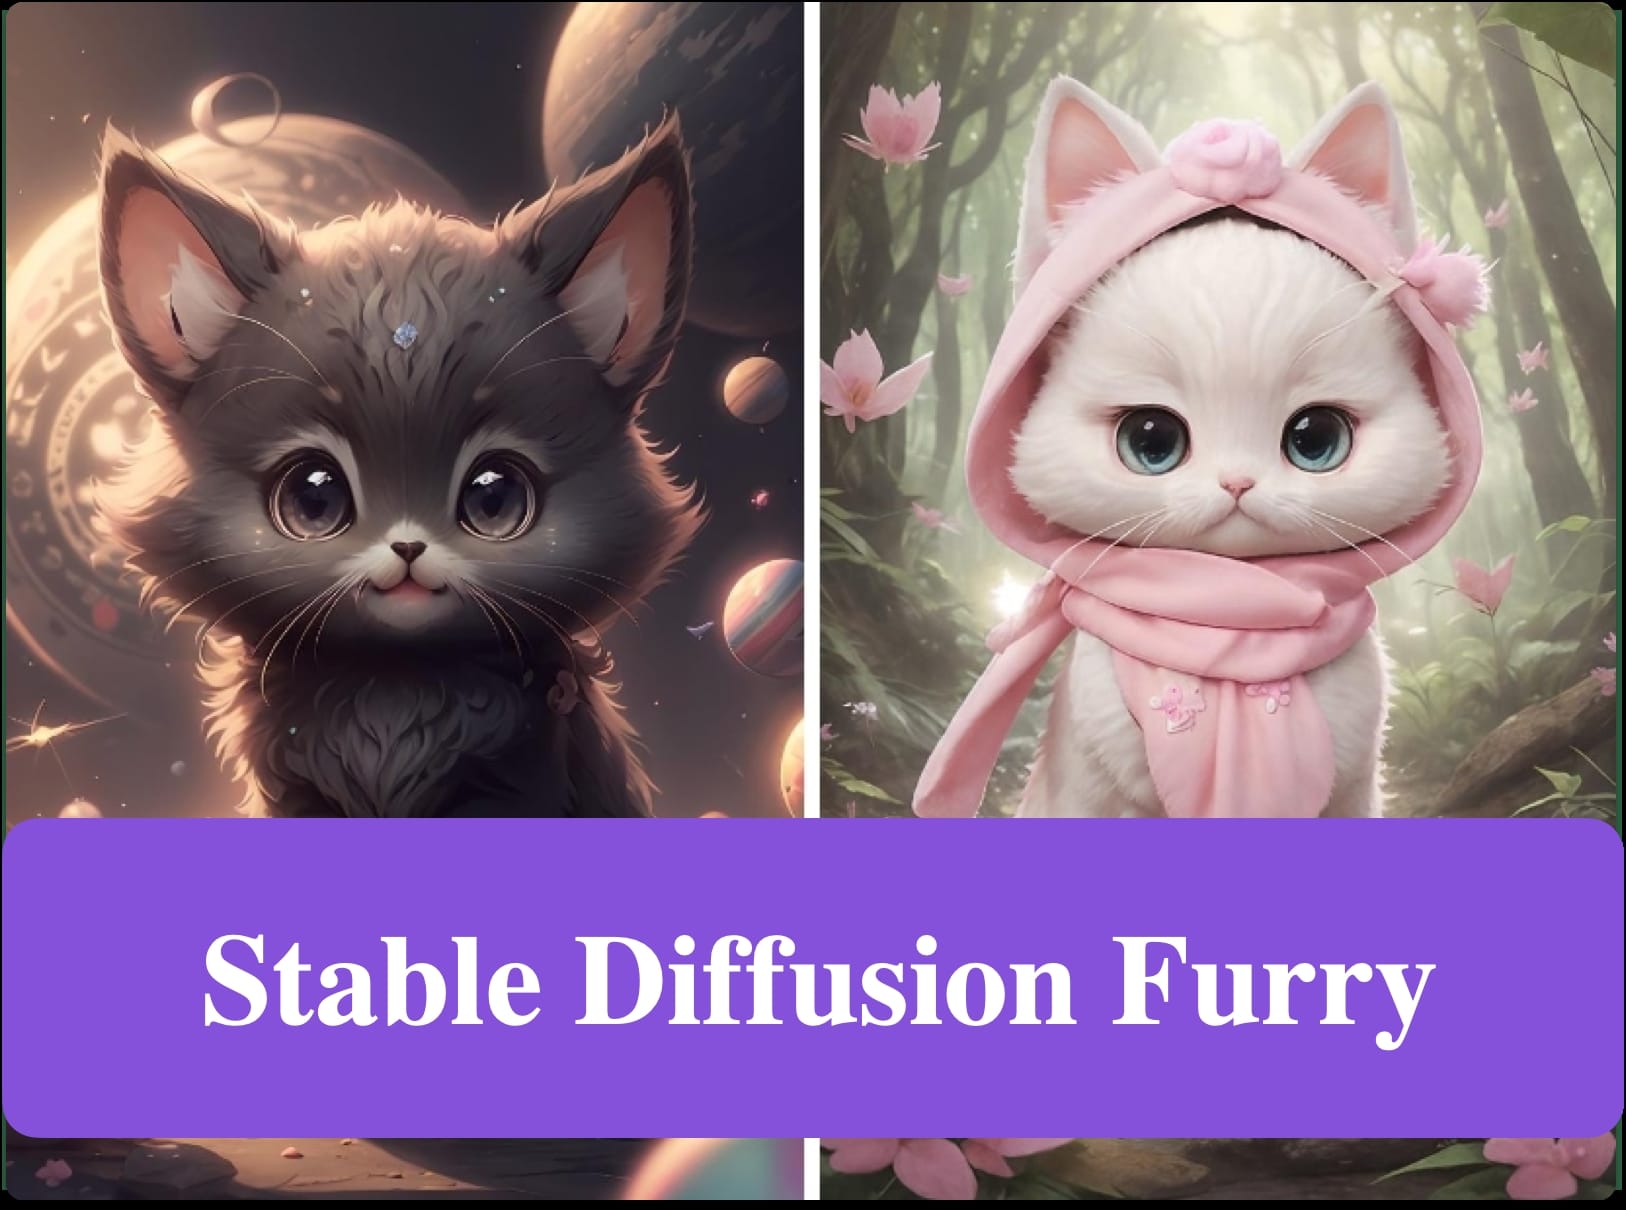 Stable Diffusion for Furry Art